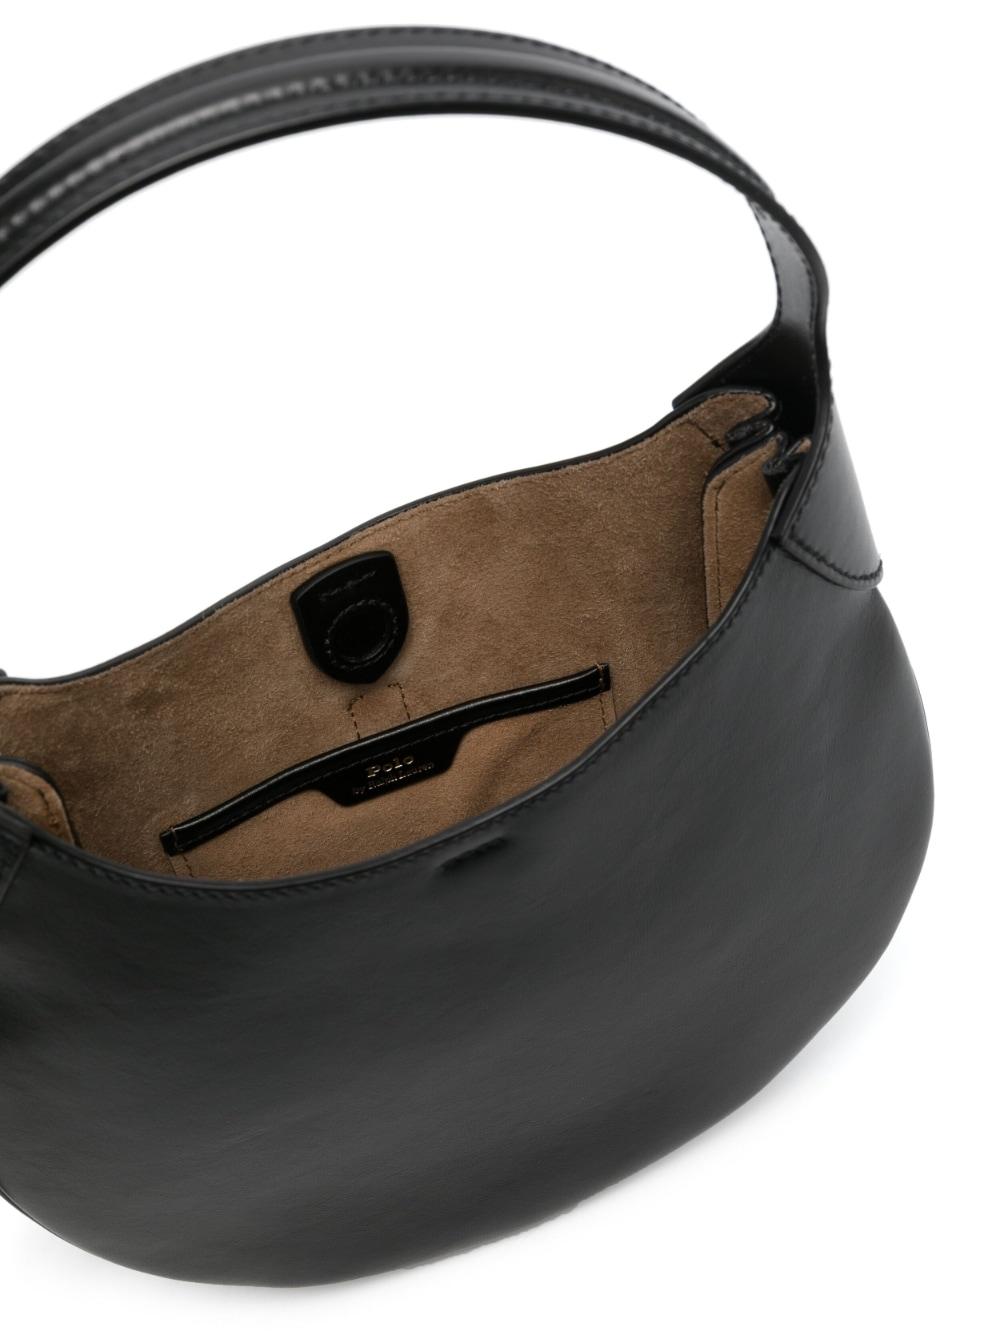 Black ID small leather shoulder bag, Polo Ralph Lauren